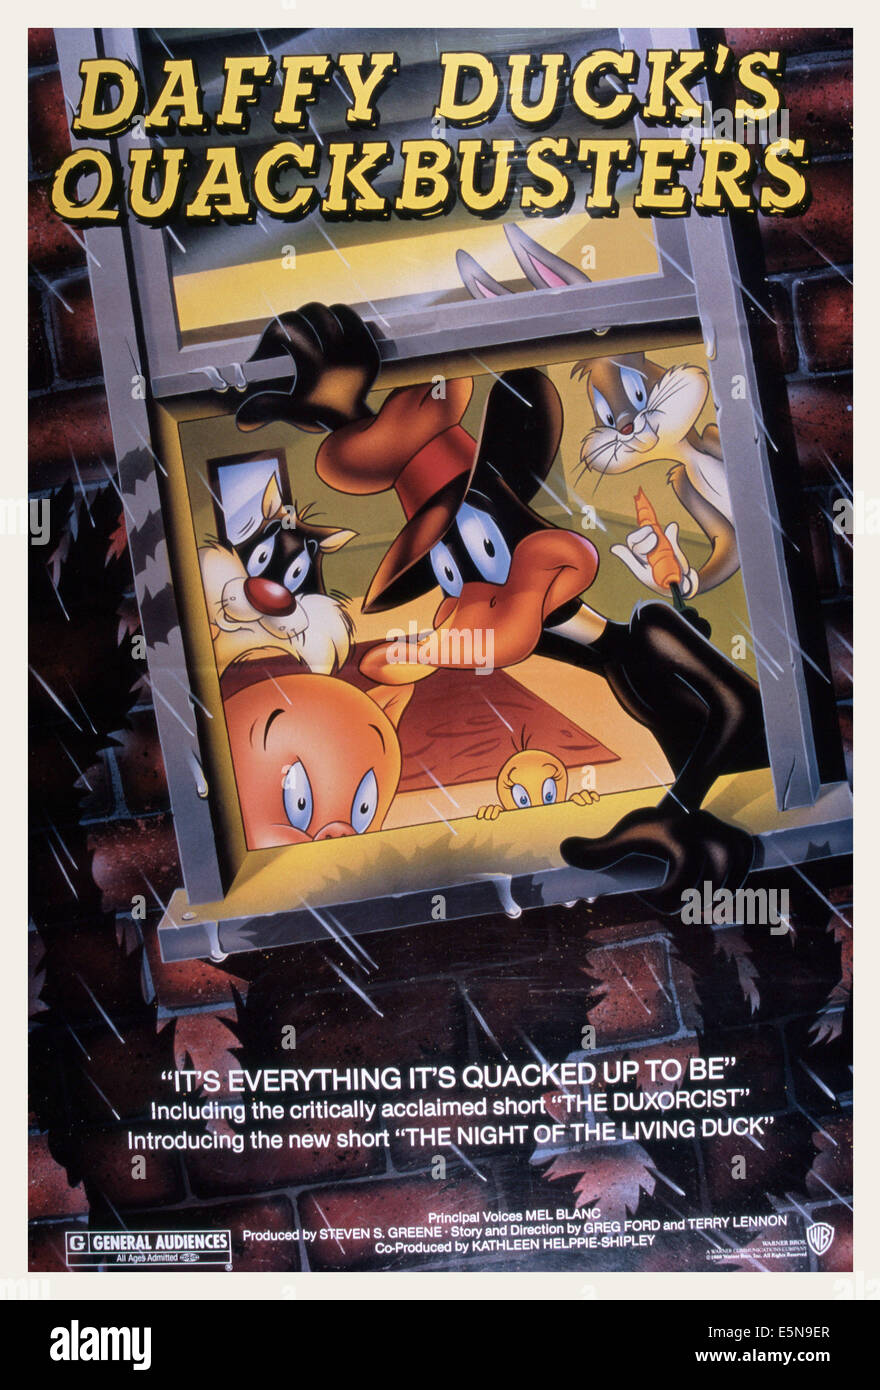 DAFFY DUCK'S QUACKBUSTERS, Bugs Bunny, Daffy Duck,  Sylvester the cat, Elmer Fudd, Tweety, 1988. ©Warner Brothers/courtesy Stock Photo